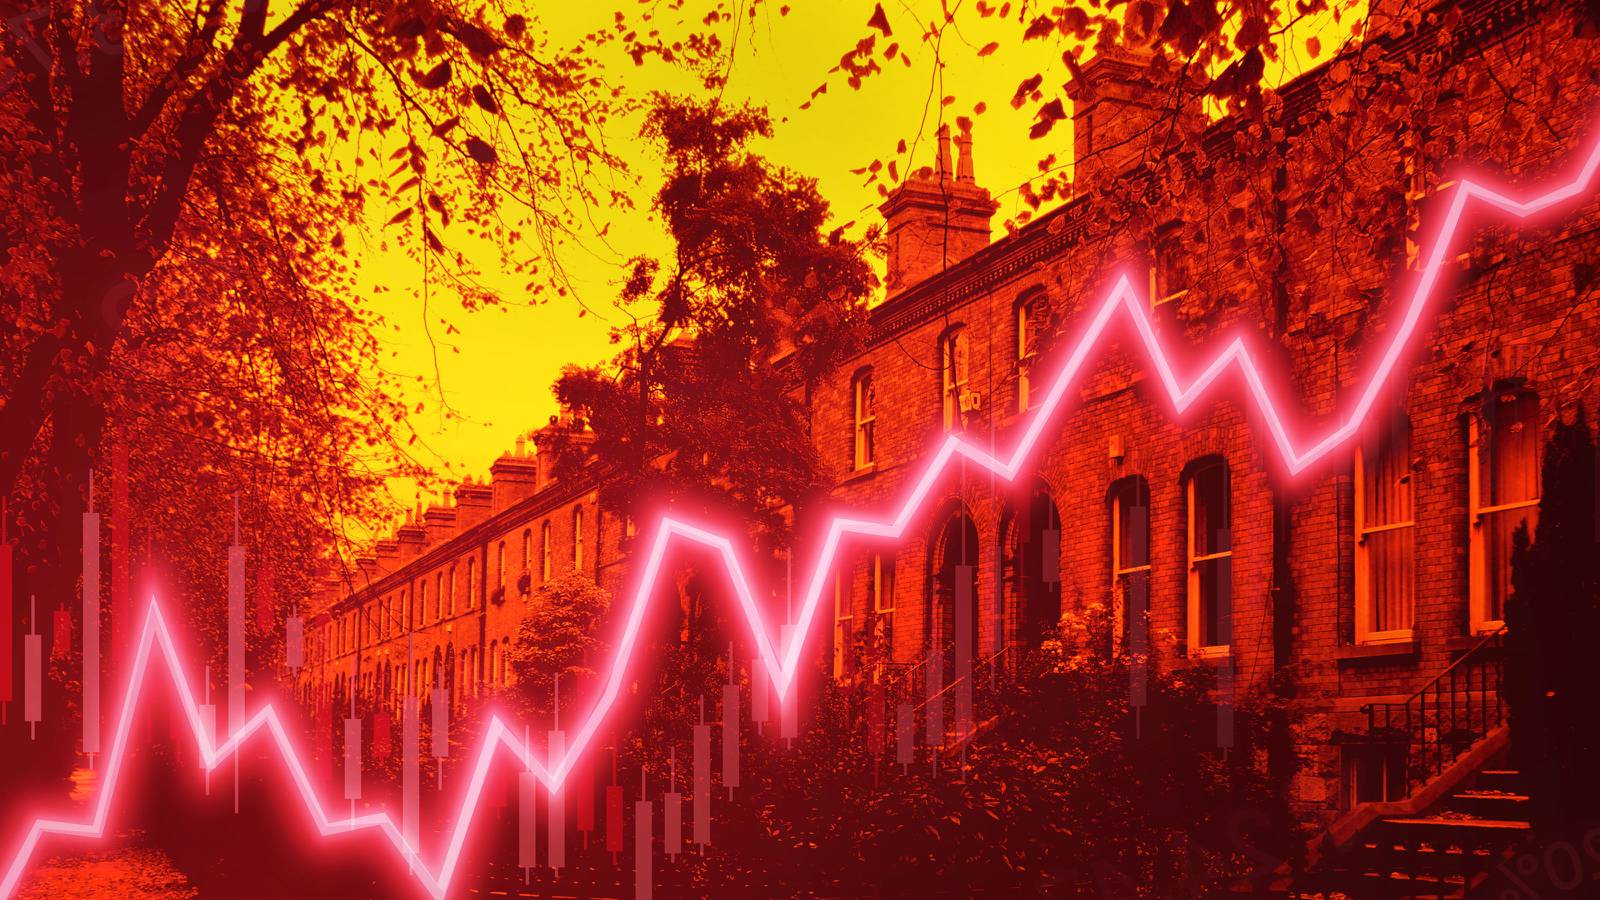 Pressure on home prices will continue until there is ‘a substantial increase in supply’, says BPFI